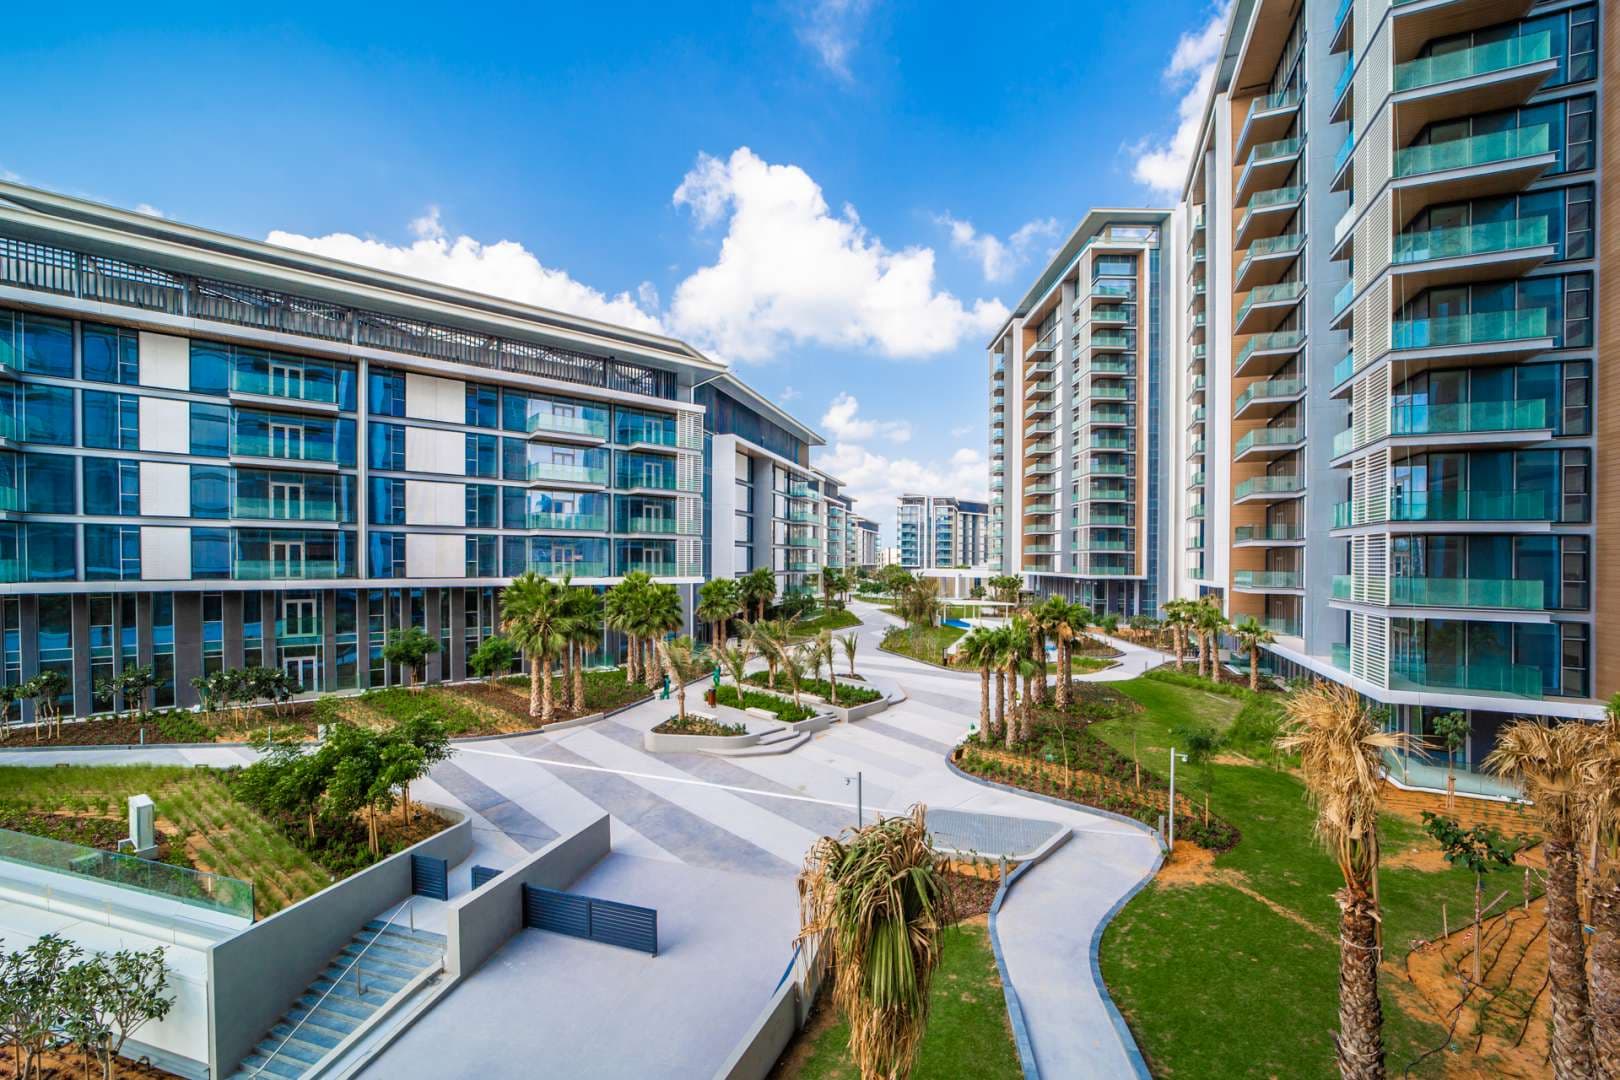 2 Bedroom Apartment For Sale Bluewaters Residences Lp06697 89e3f4eb6692e00.jpg